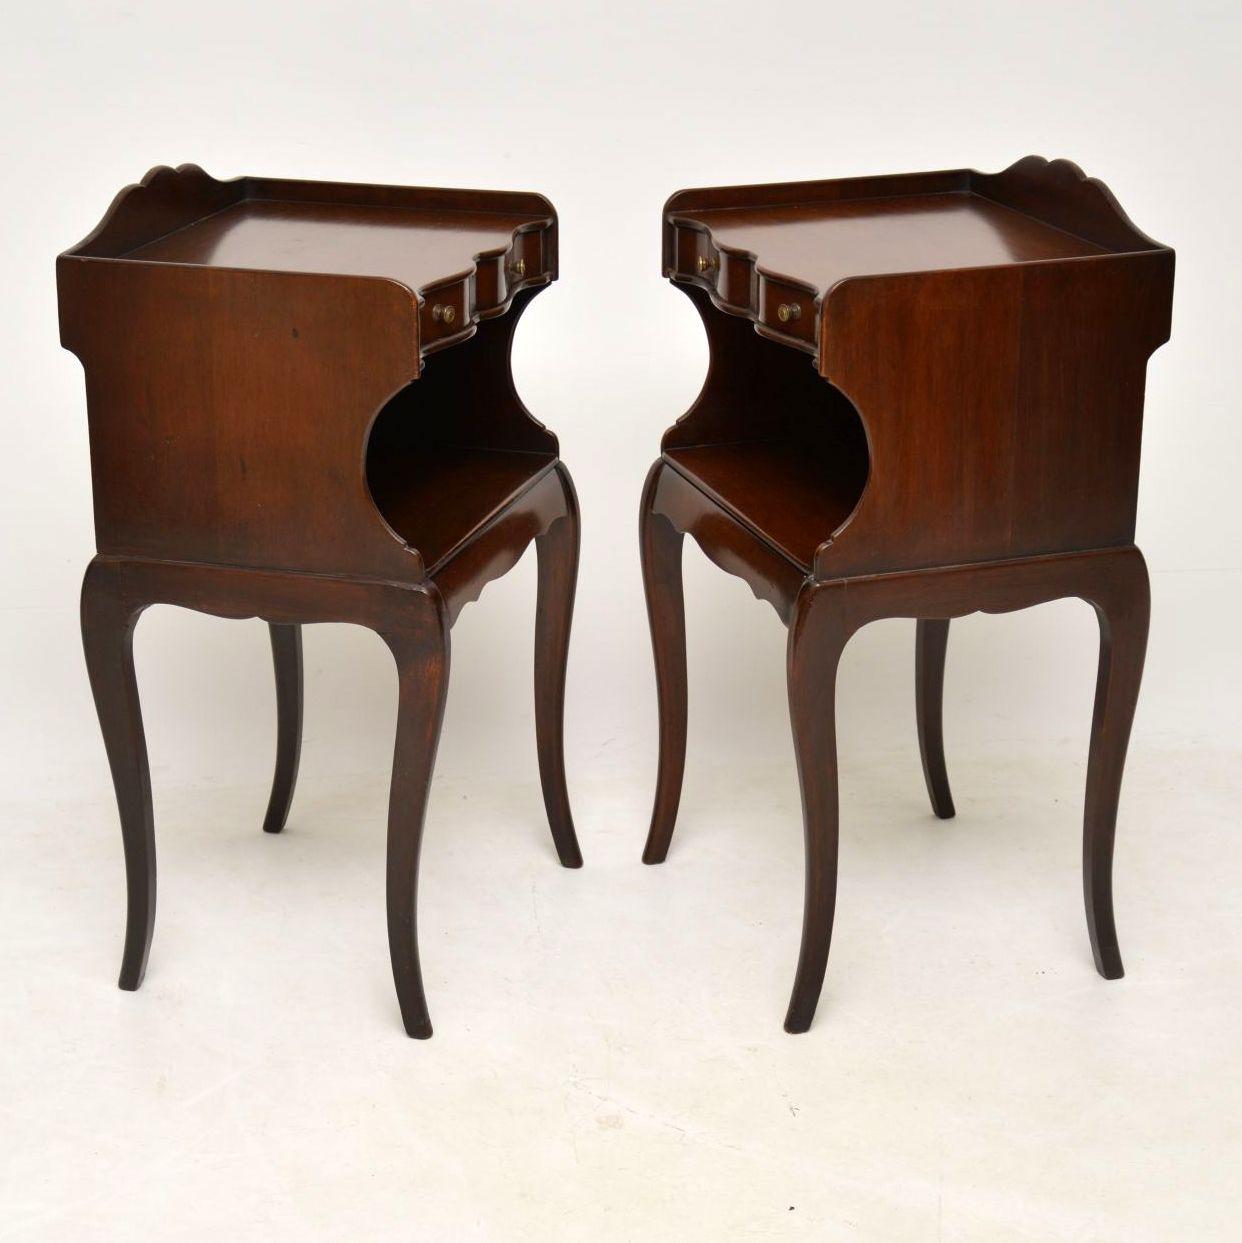 Edwardian Pair of Antique Mahogany Bedside Cabinets / Side Tables